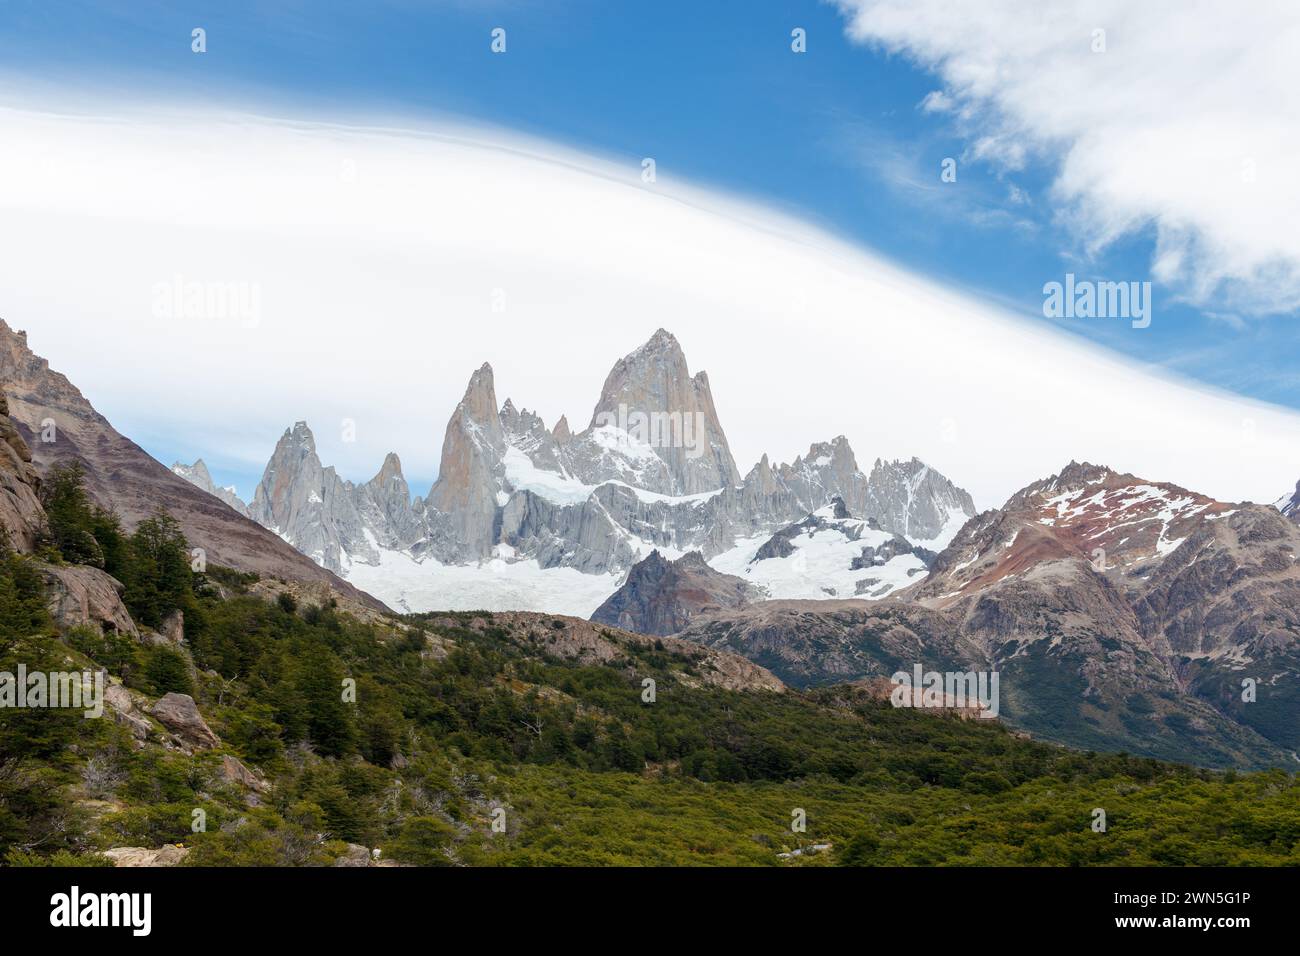 Mountain range Fitz Roy on a sunny day with blue sky and cool clouds. It is a mountain in Patagonia, on the border between Argentina and Chile. Stock Photo